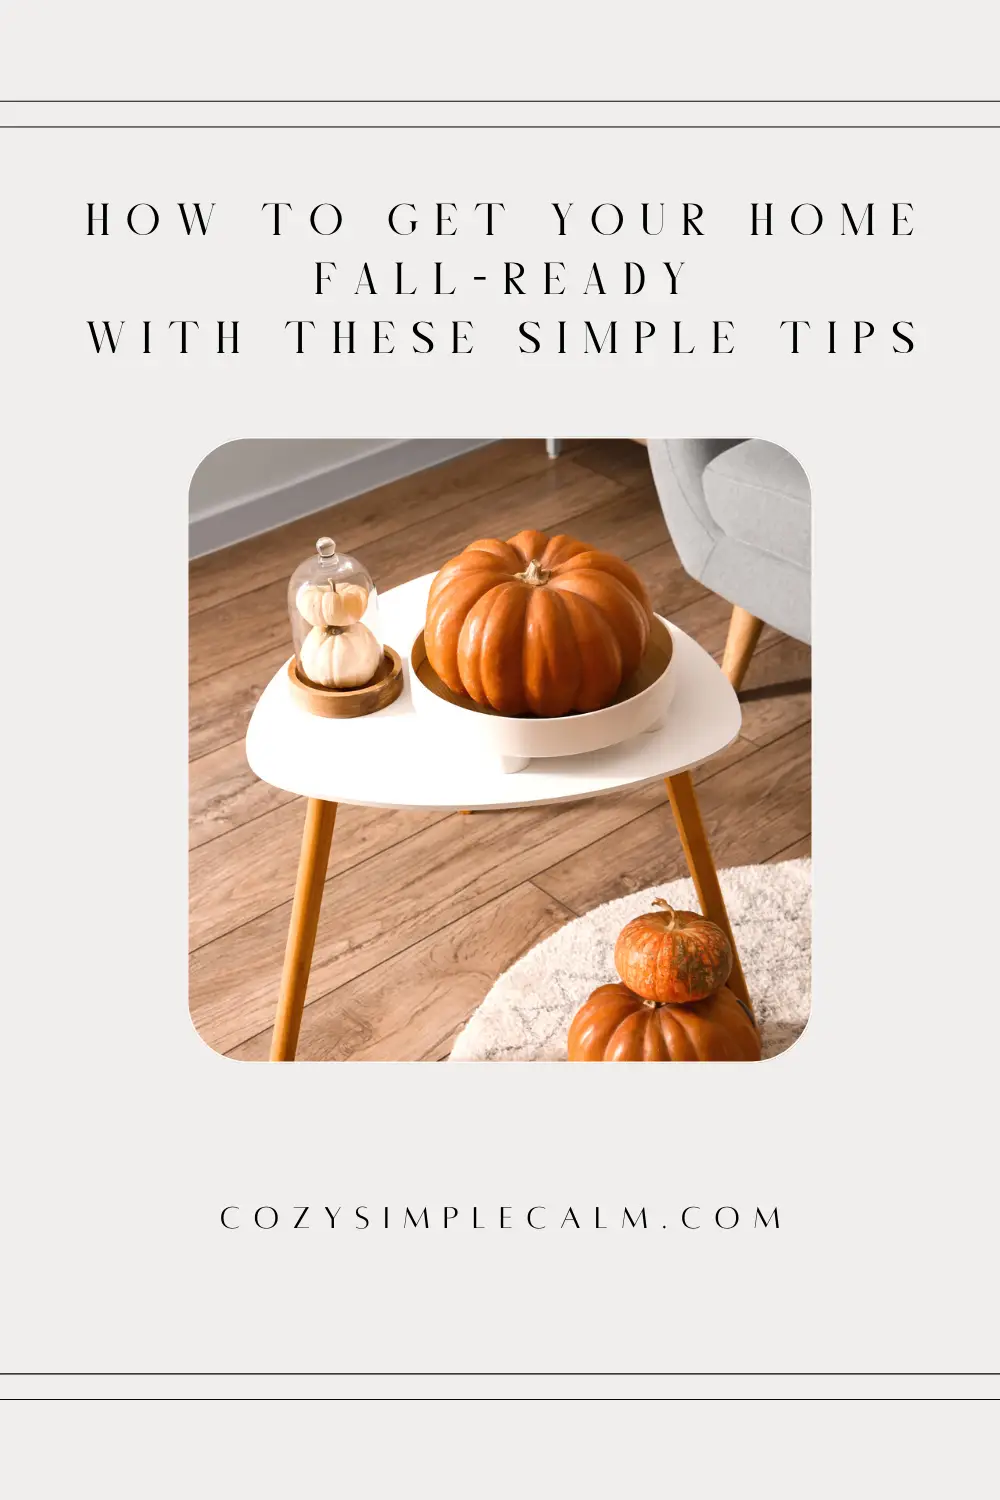 Image of orange and white pumpkins sitting on end table - Text overlay: How to get your home fall-ready with these simple tips - cozysimplecalm.com